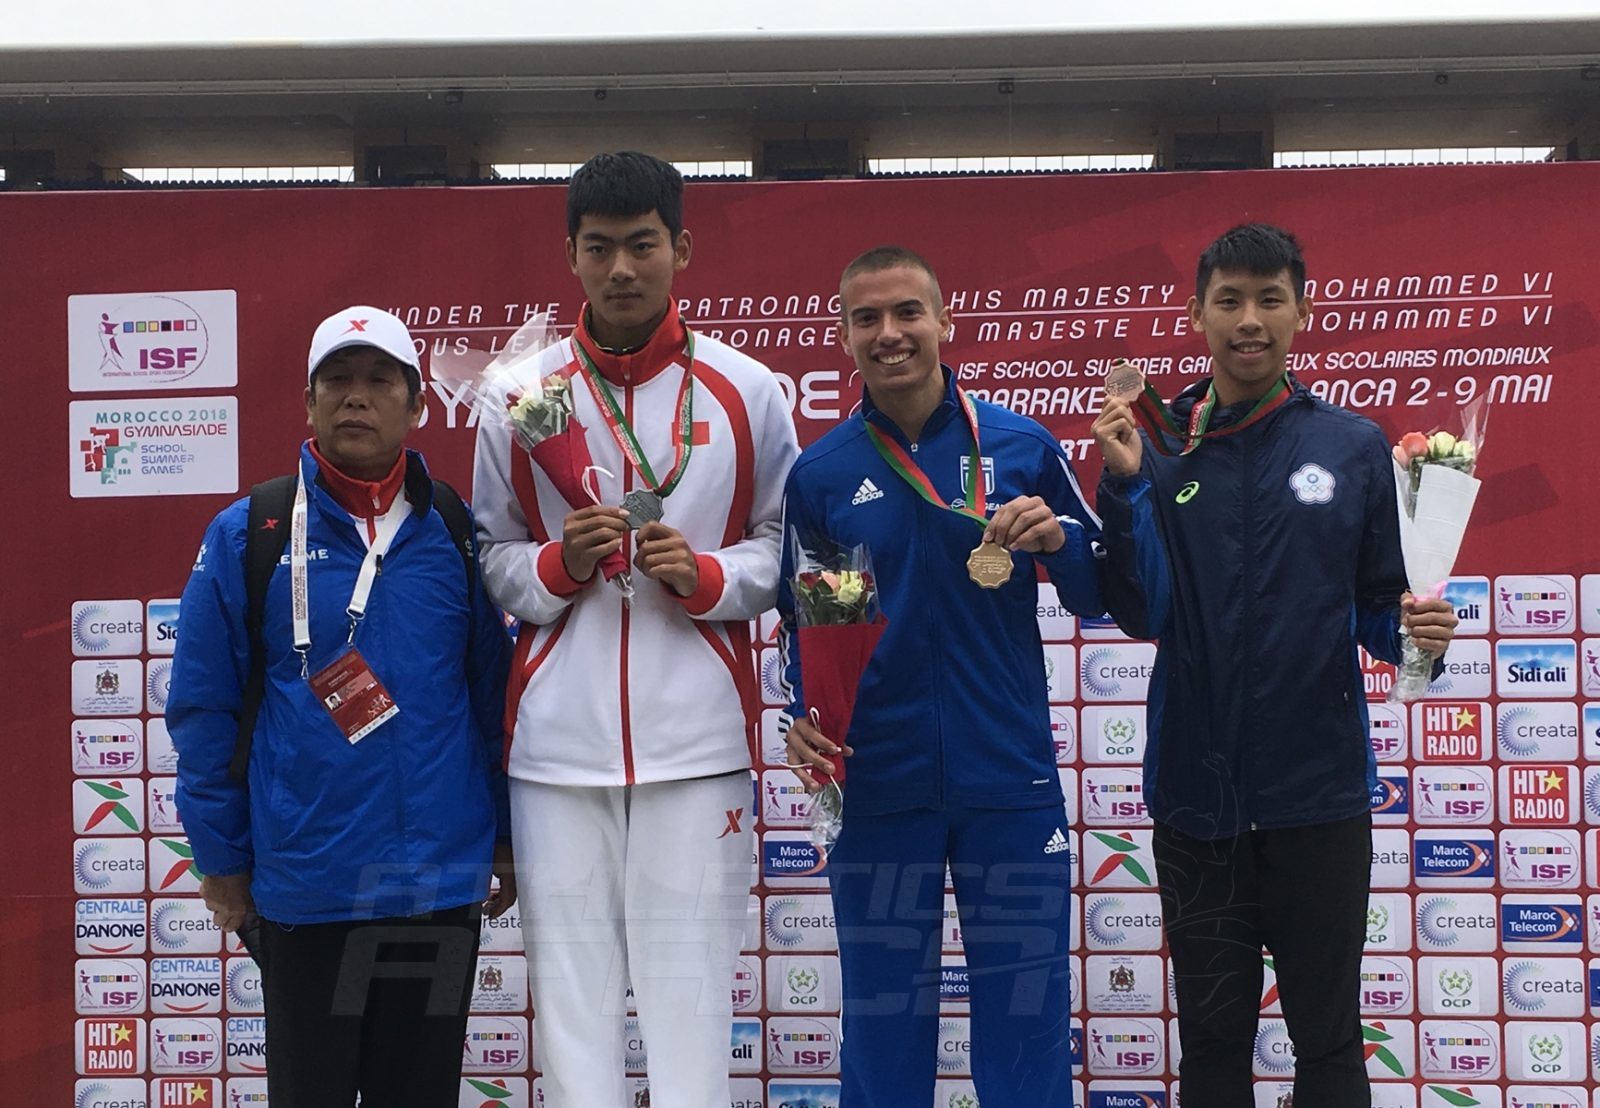 Ioannis Granitsiotis of Greece (C) flanked by Tai An of China and Yu-Sian Lin of Chinese Taipei on the podium after the Boys 100m medal presentation at Gymnasiade 2018 in Marrakech / Photo Credit: Yomi Omogbeja